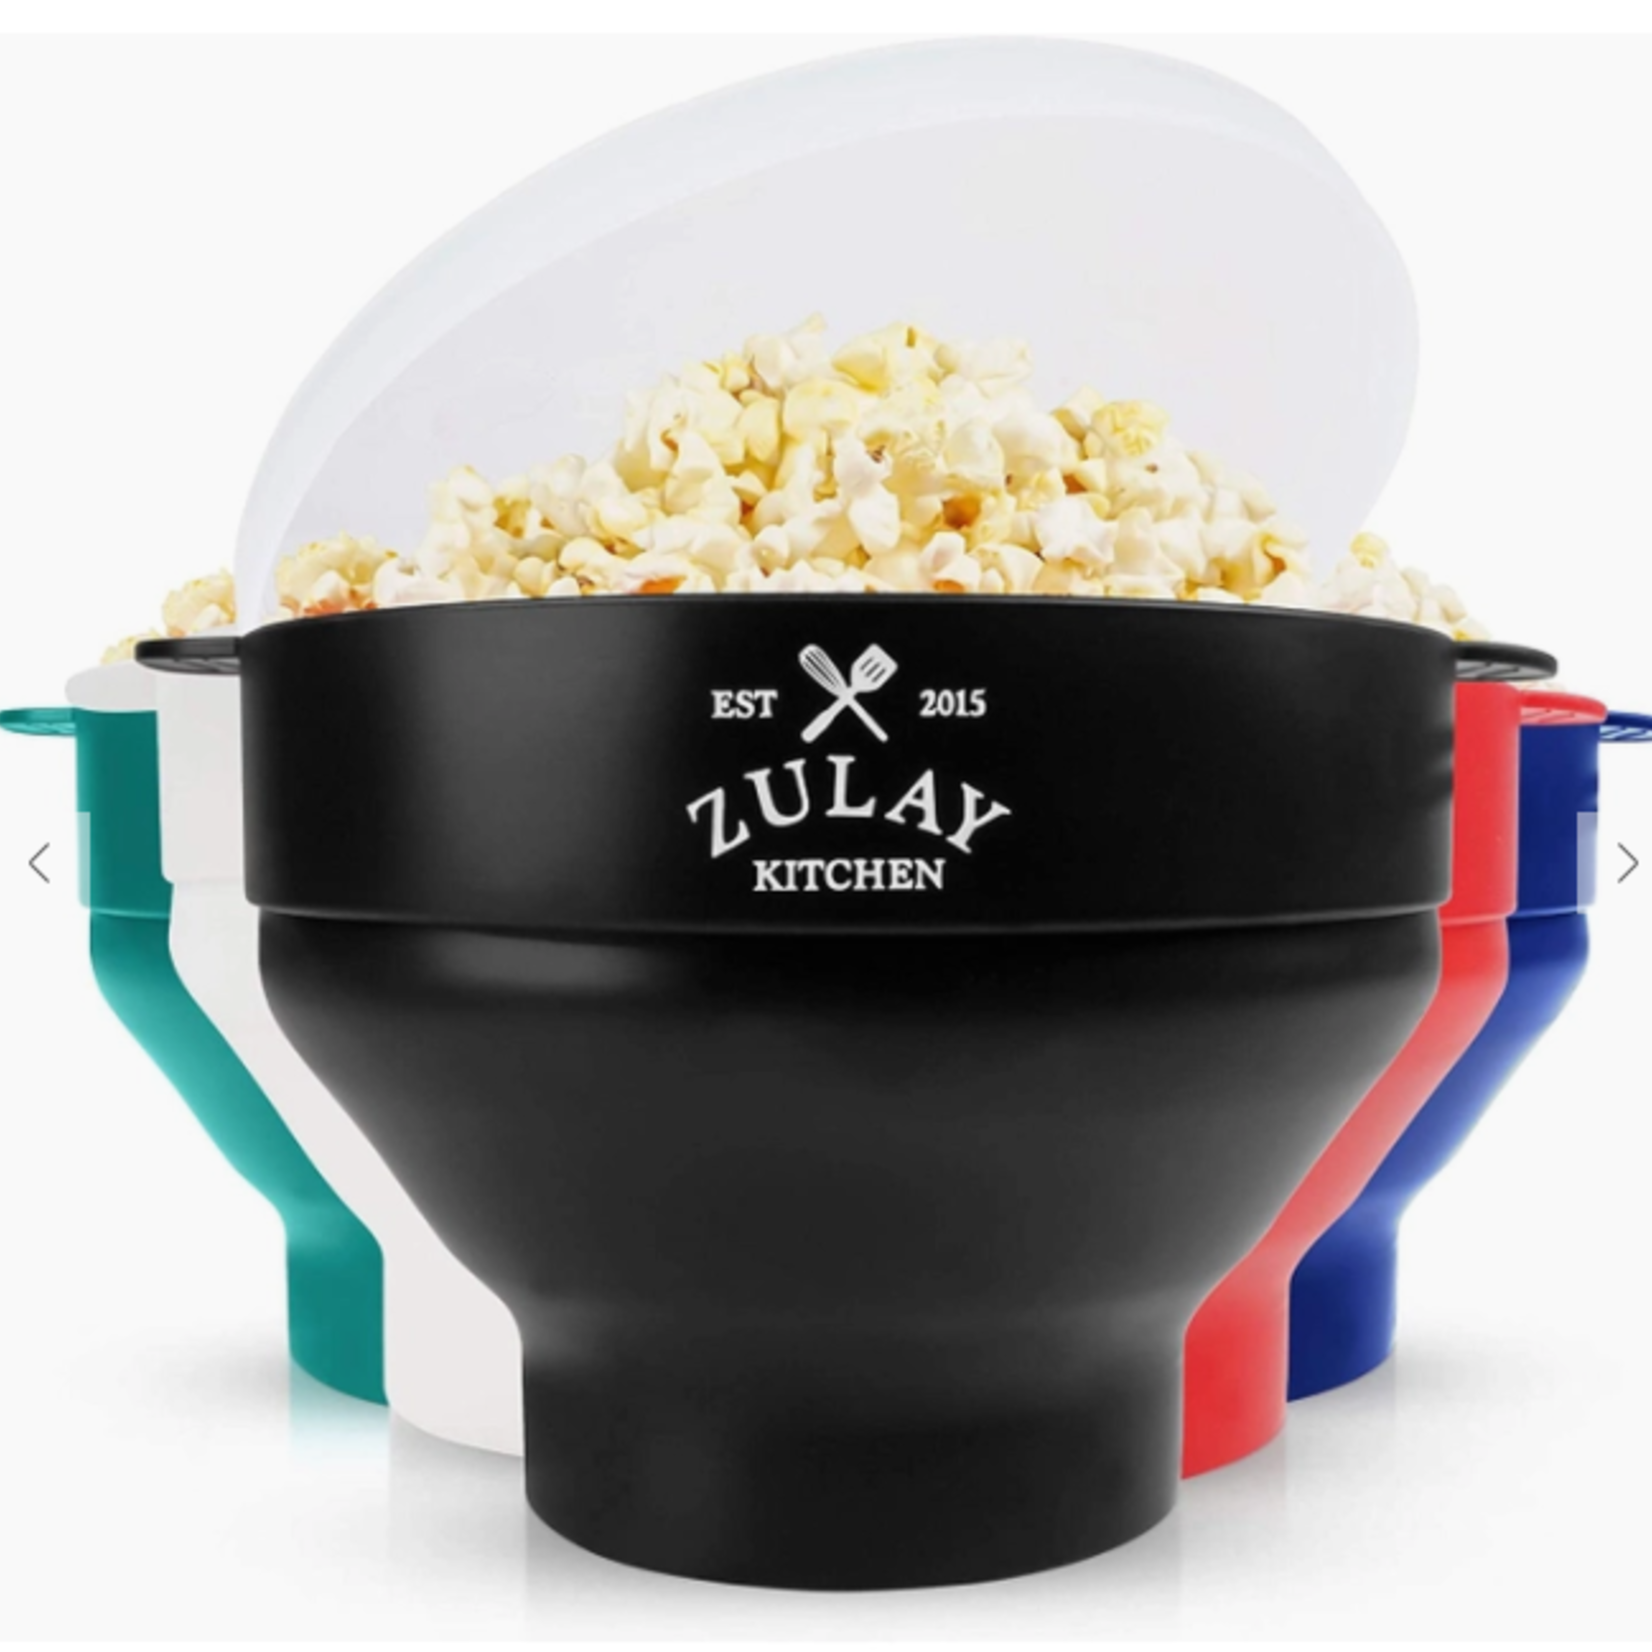 Zulay Kitchen Microwave Popcorn Popper Collapsible- Black